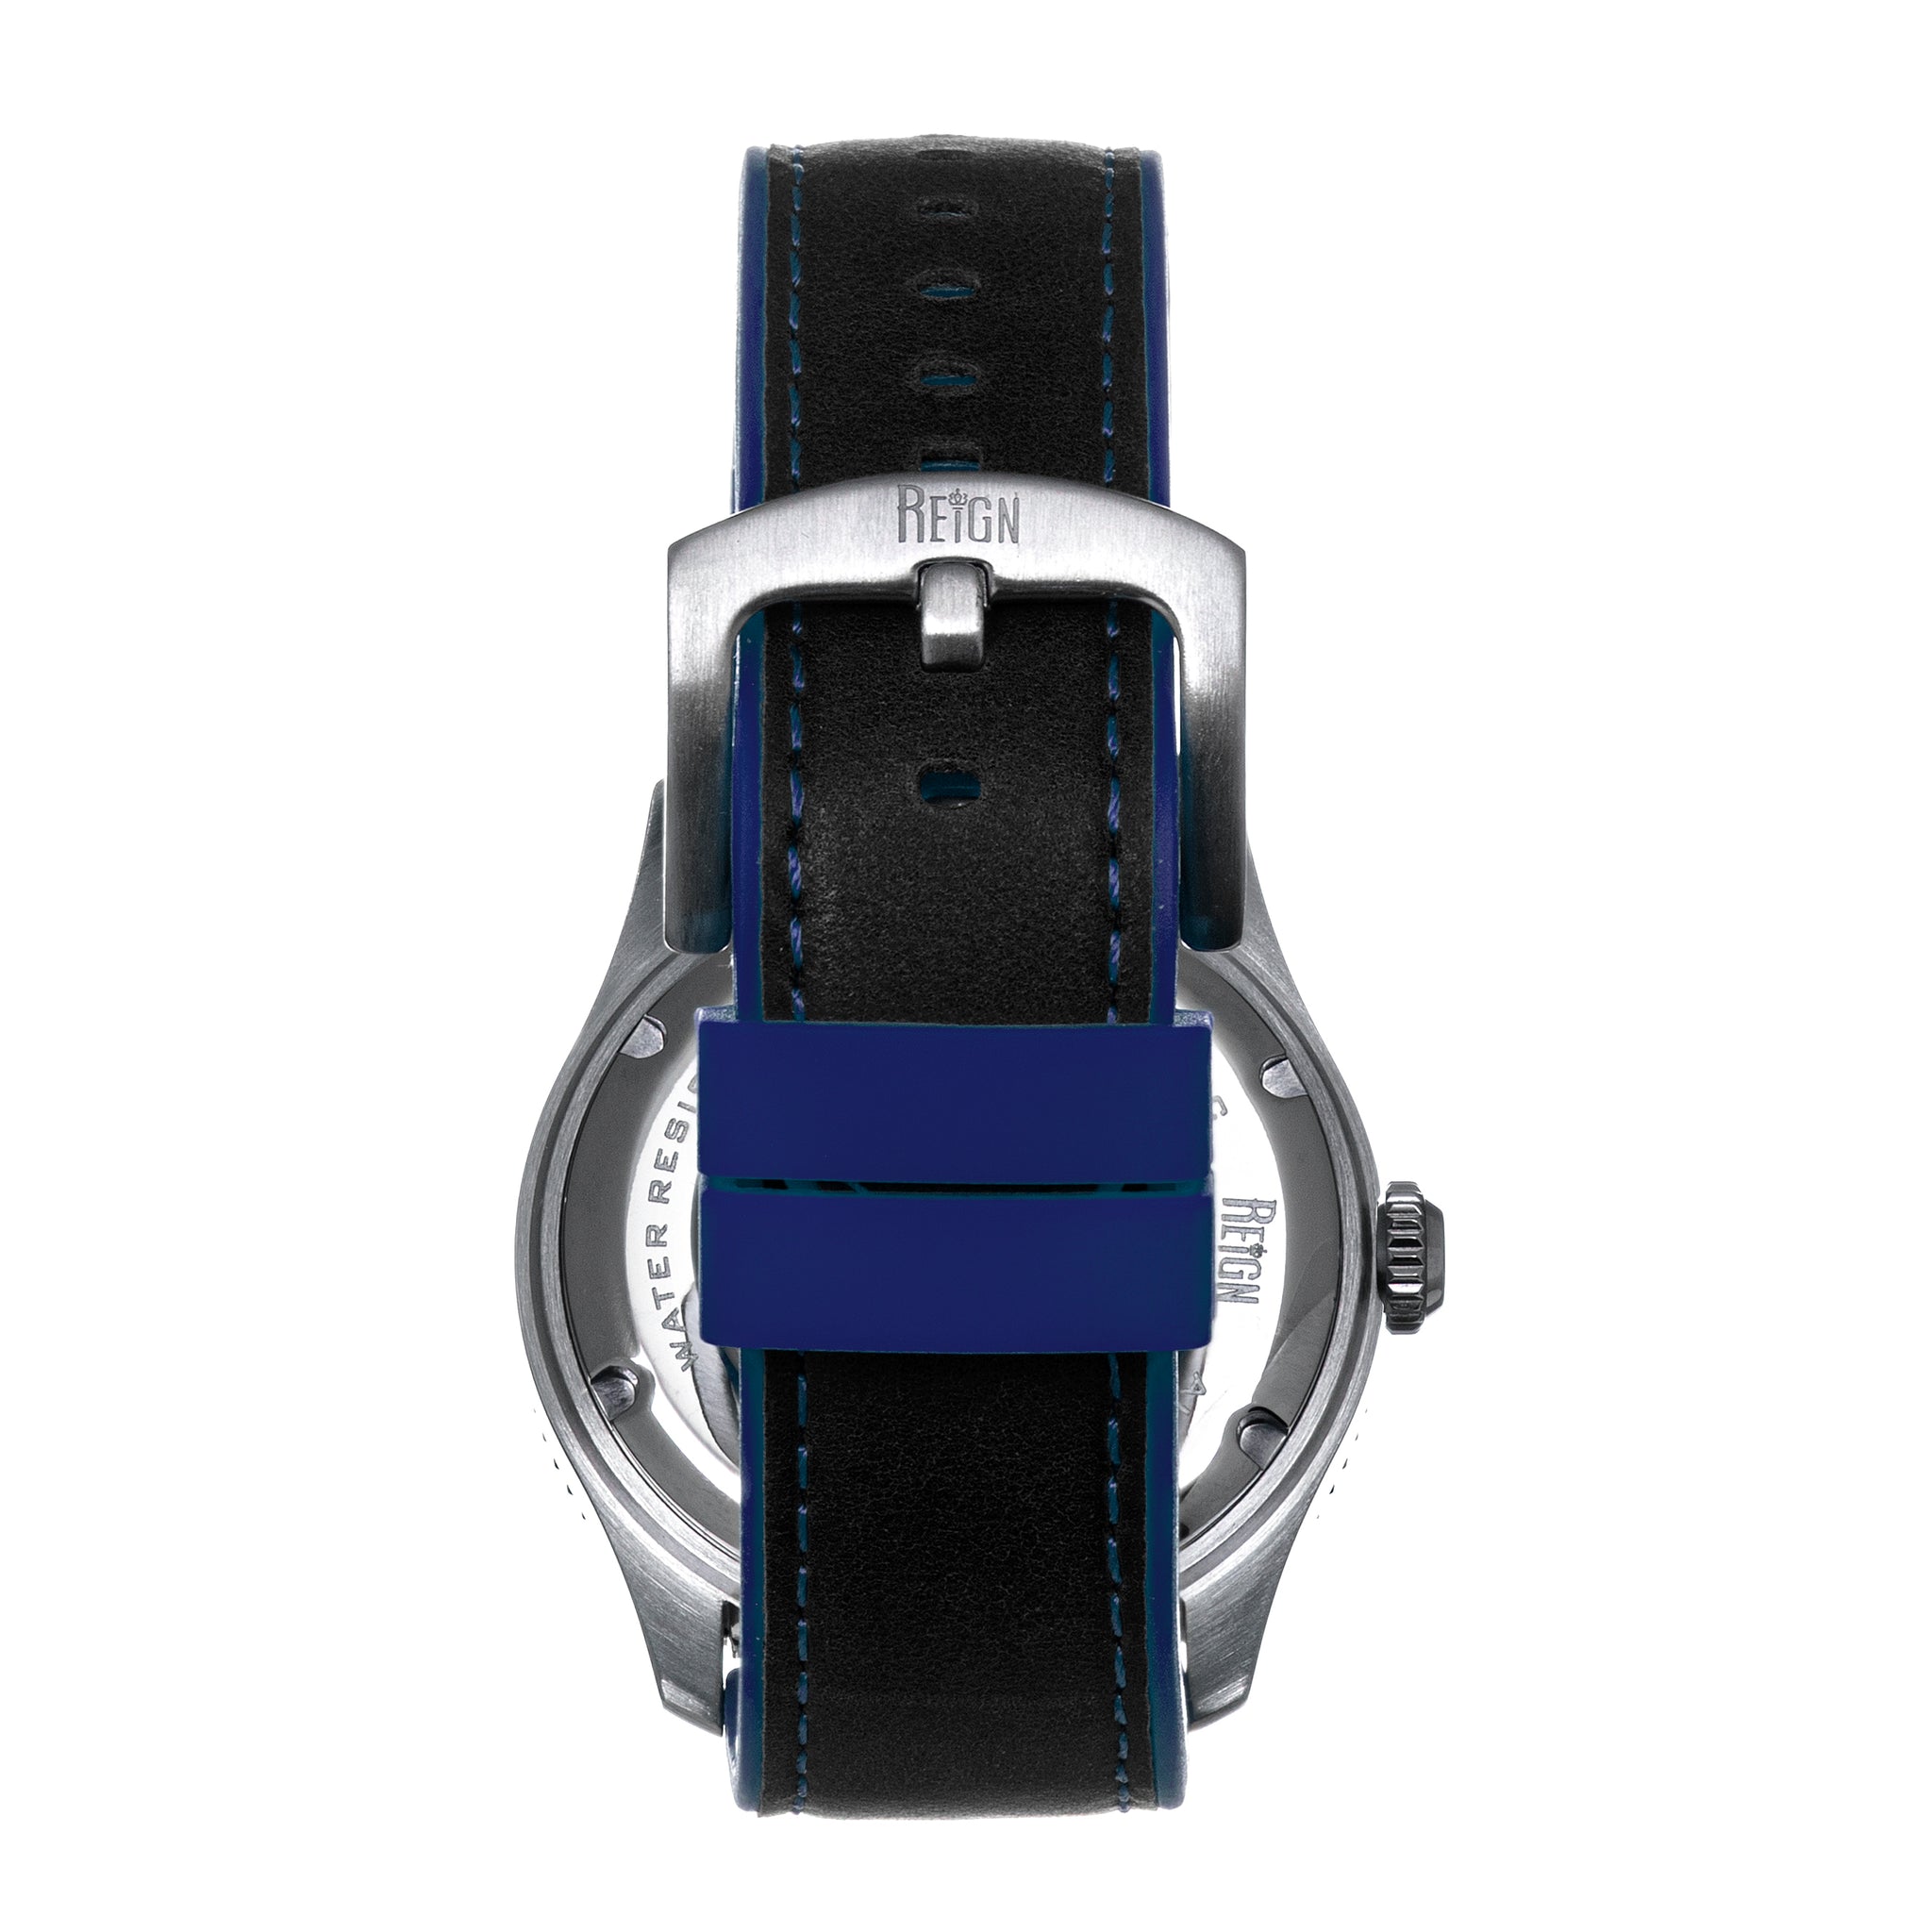 Reign Elijah Automatic Rubber Inlaid Leather-Band Watch W/Date - Black/Blue - REIRN6501